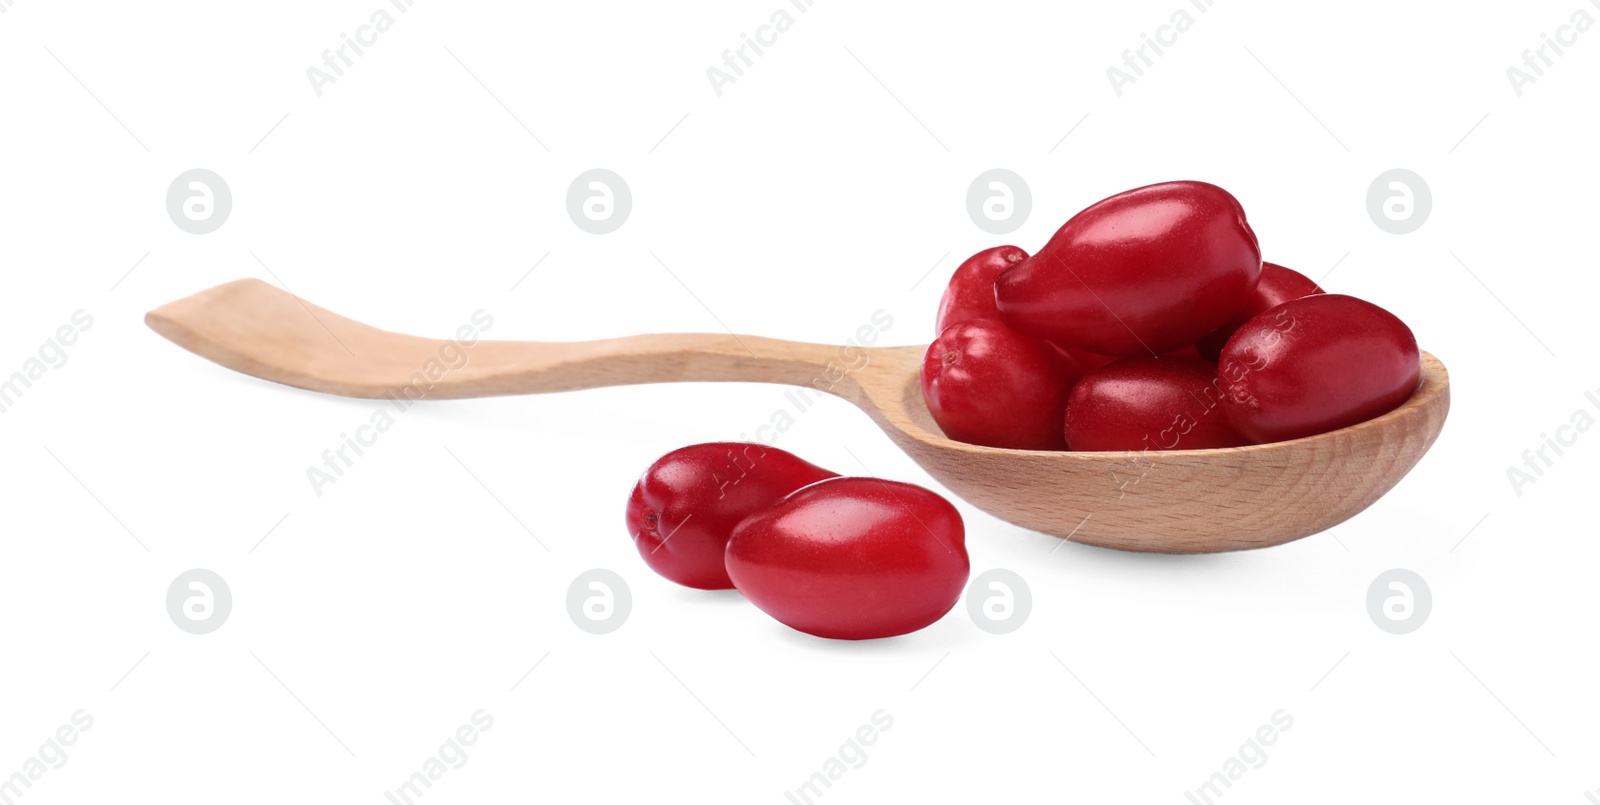 Photo of Fresh ripe dogwood berries and wooden spoon on white background